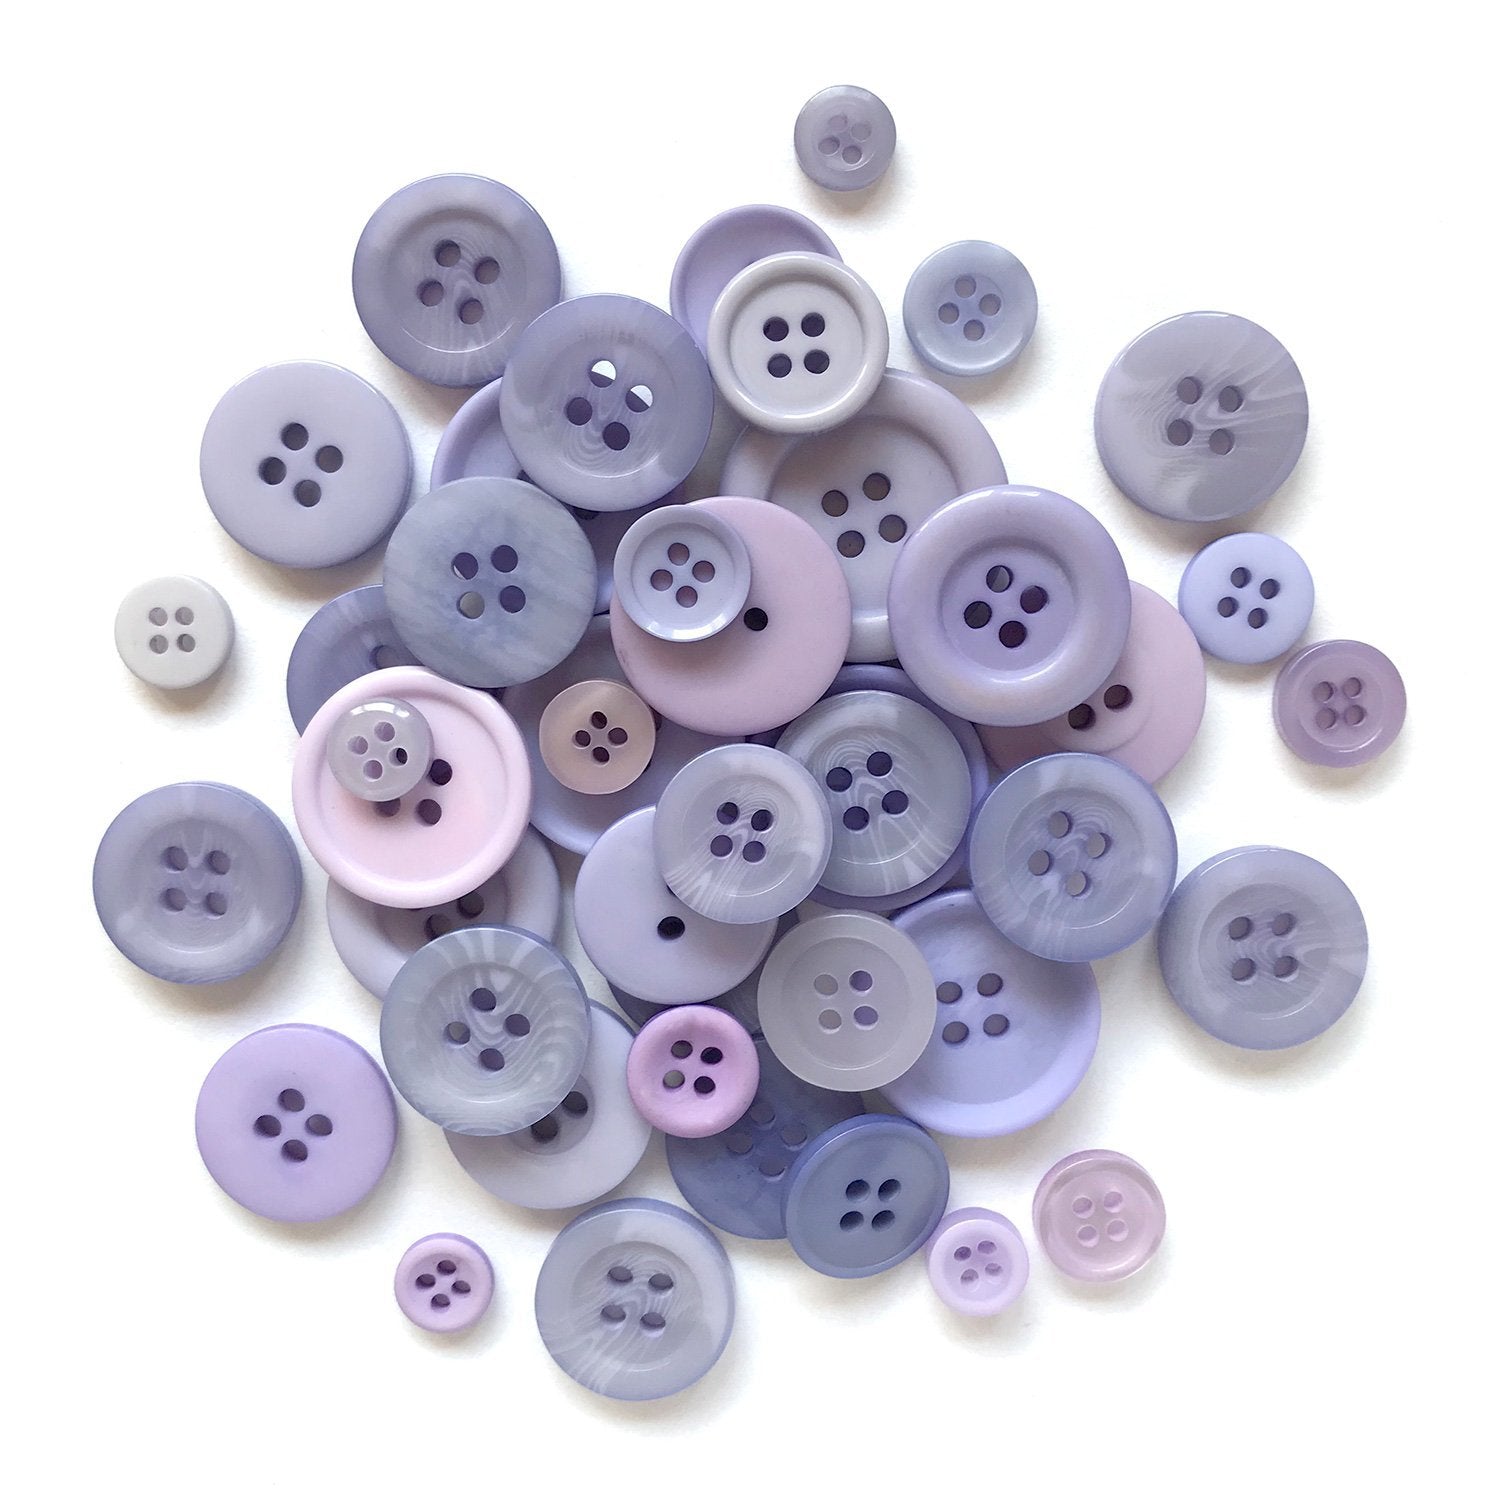  Greentime 1400-1500 Pcs Purple Buttons for Crafts Assorted Size  for Sewing DIY Crafts Decoration-Pink